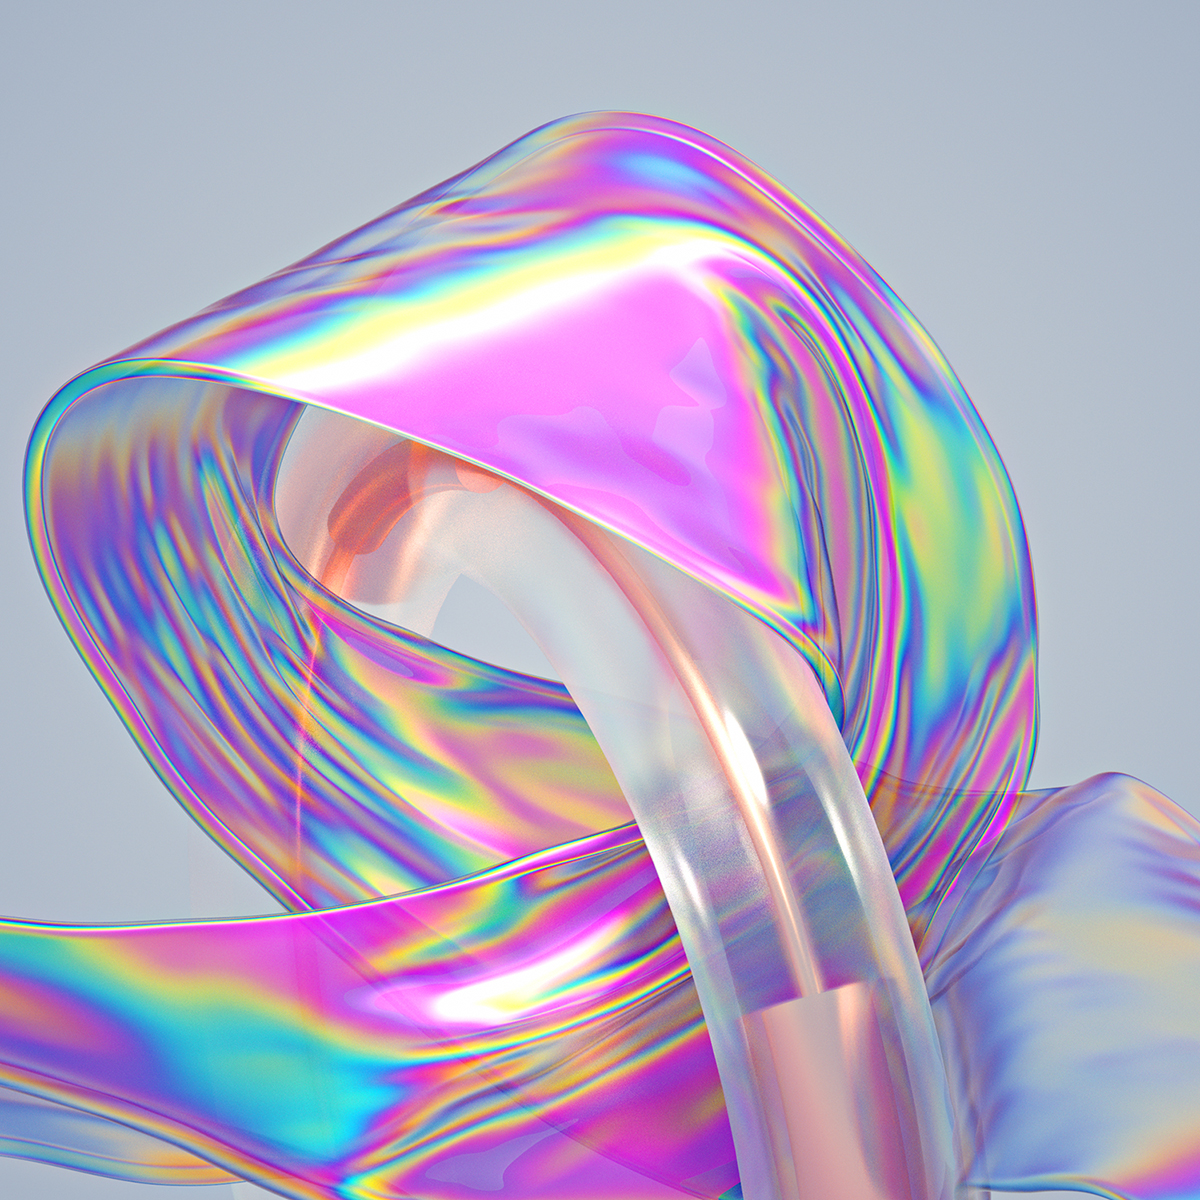 Translucent Iridescent - A digital art and motion graphic series by Machineast digital artist duo in Singapore.